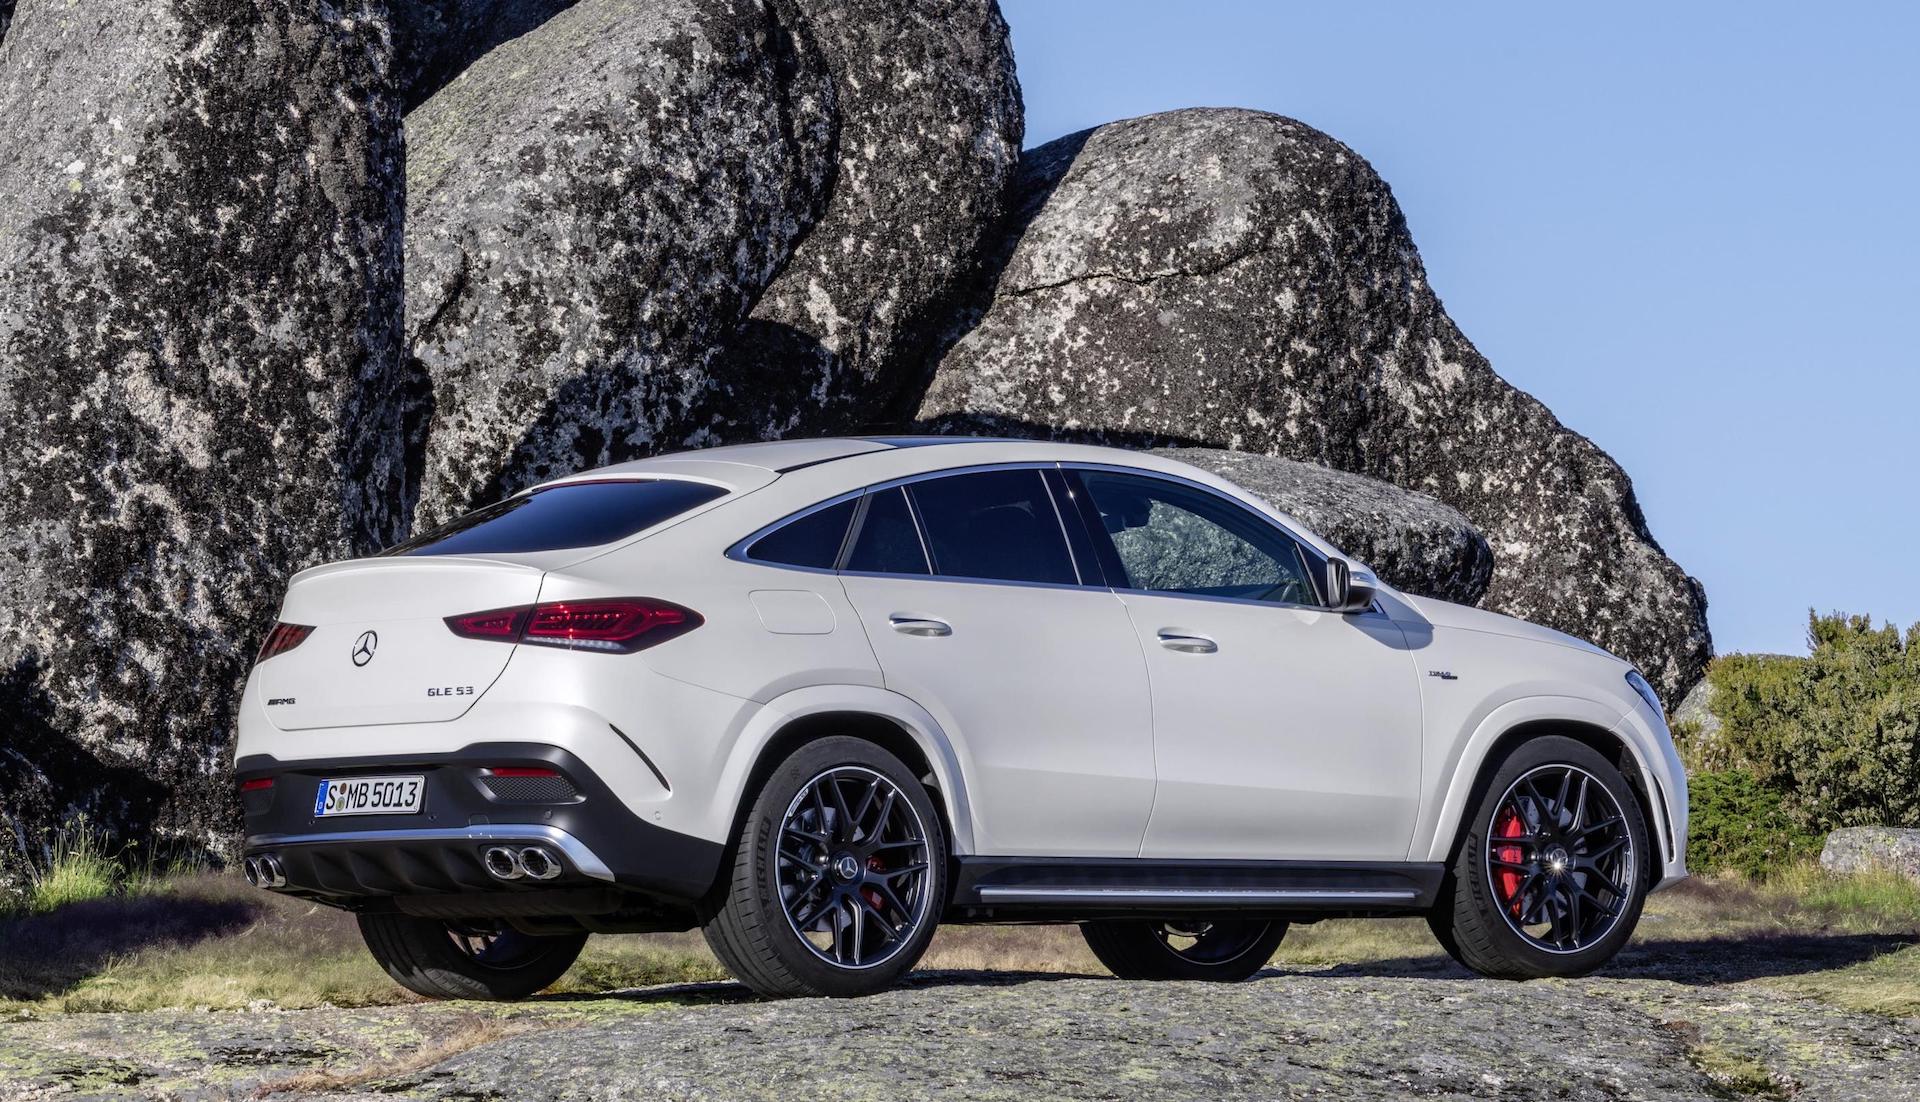 2020 MercedesBenz GLE Coupe unveiled, with AMG 53